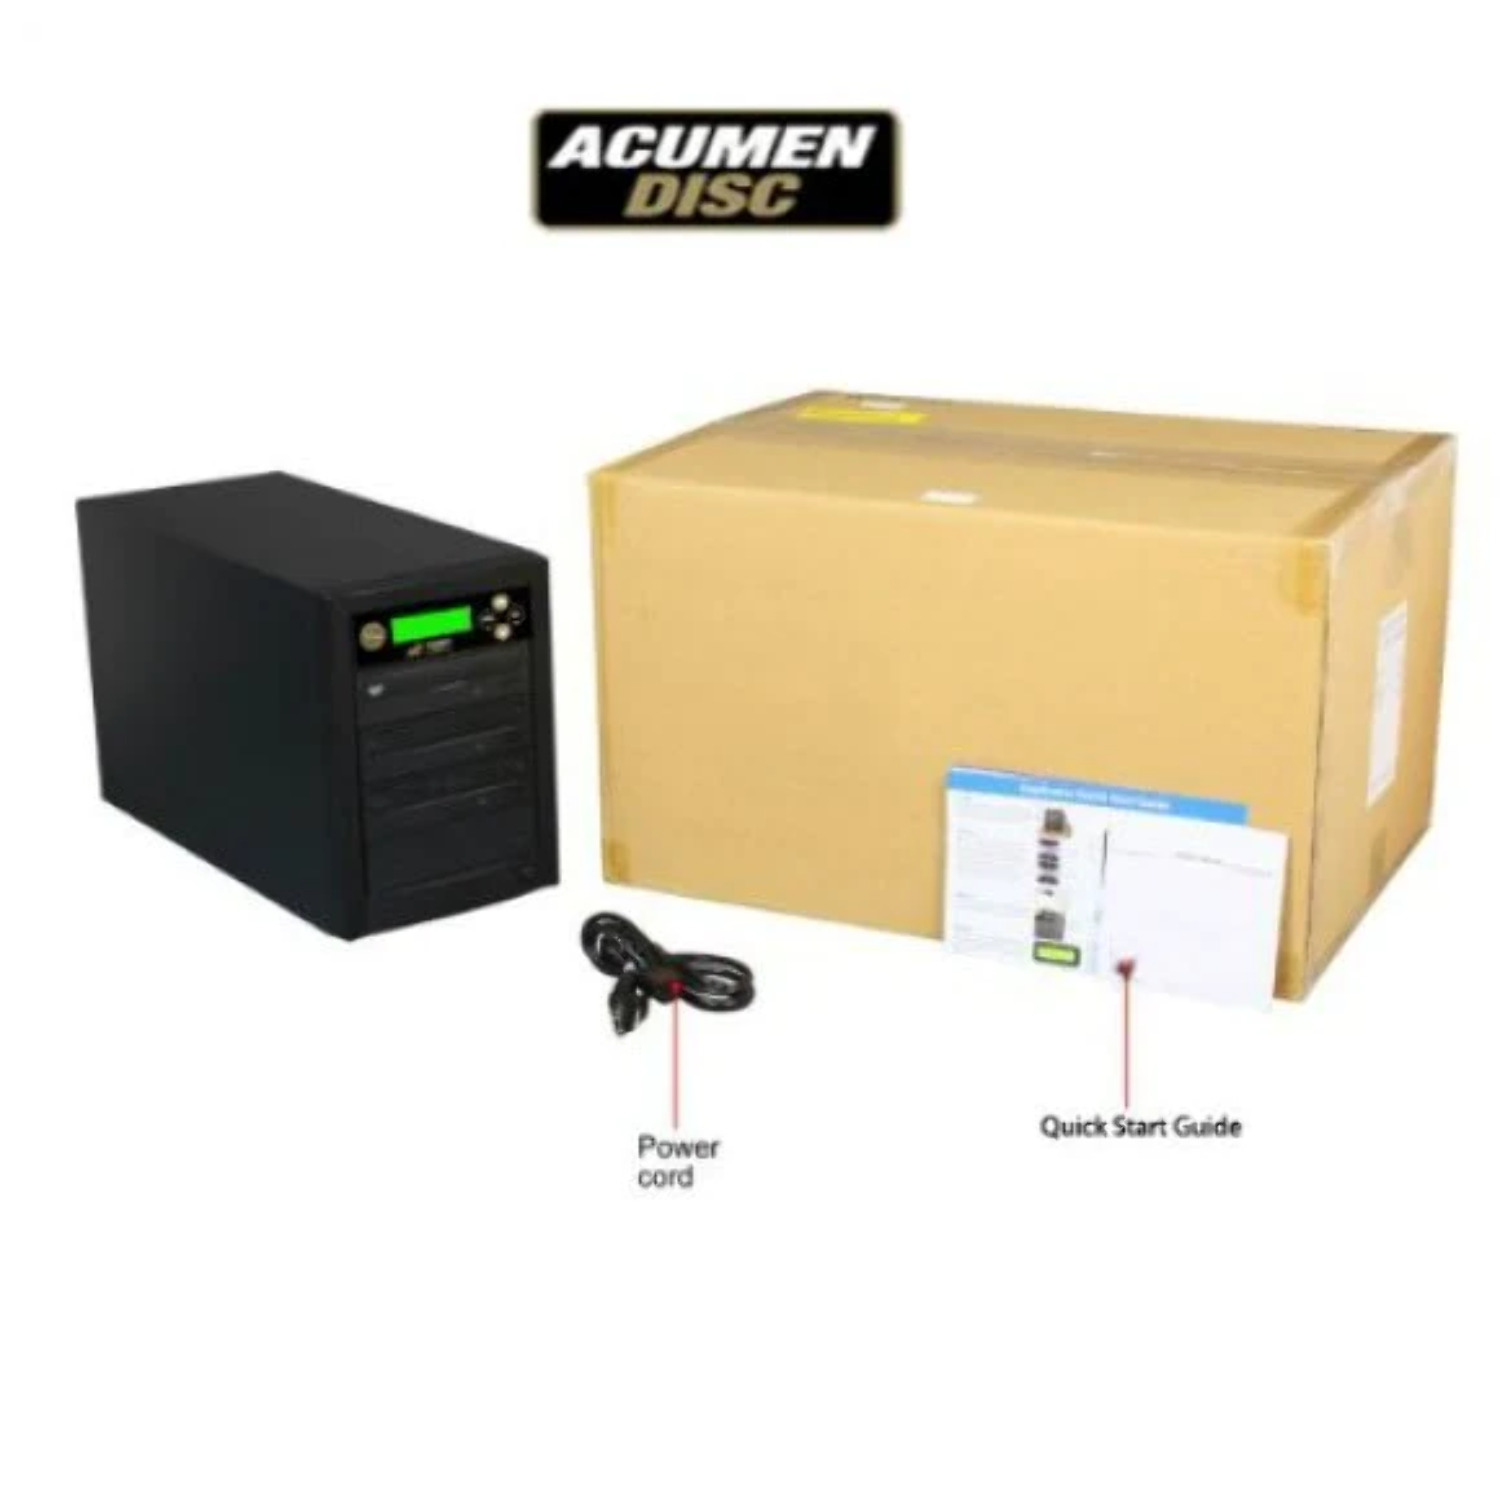 Acumen Disc 1 to 1 DVD Multimedia Backup Duplicator - Flash Media (CF / SD / USB / MMS) to Discs (DVD/CD) Copier Tower System - image 5 of 8